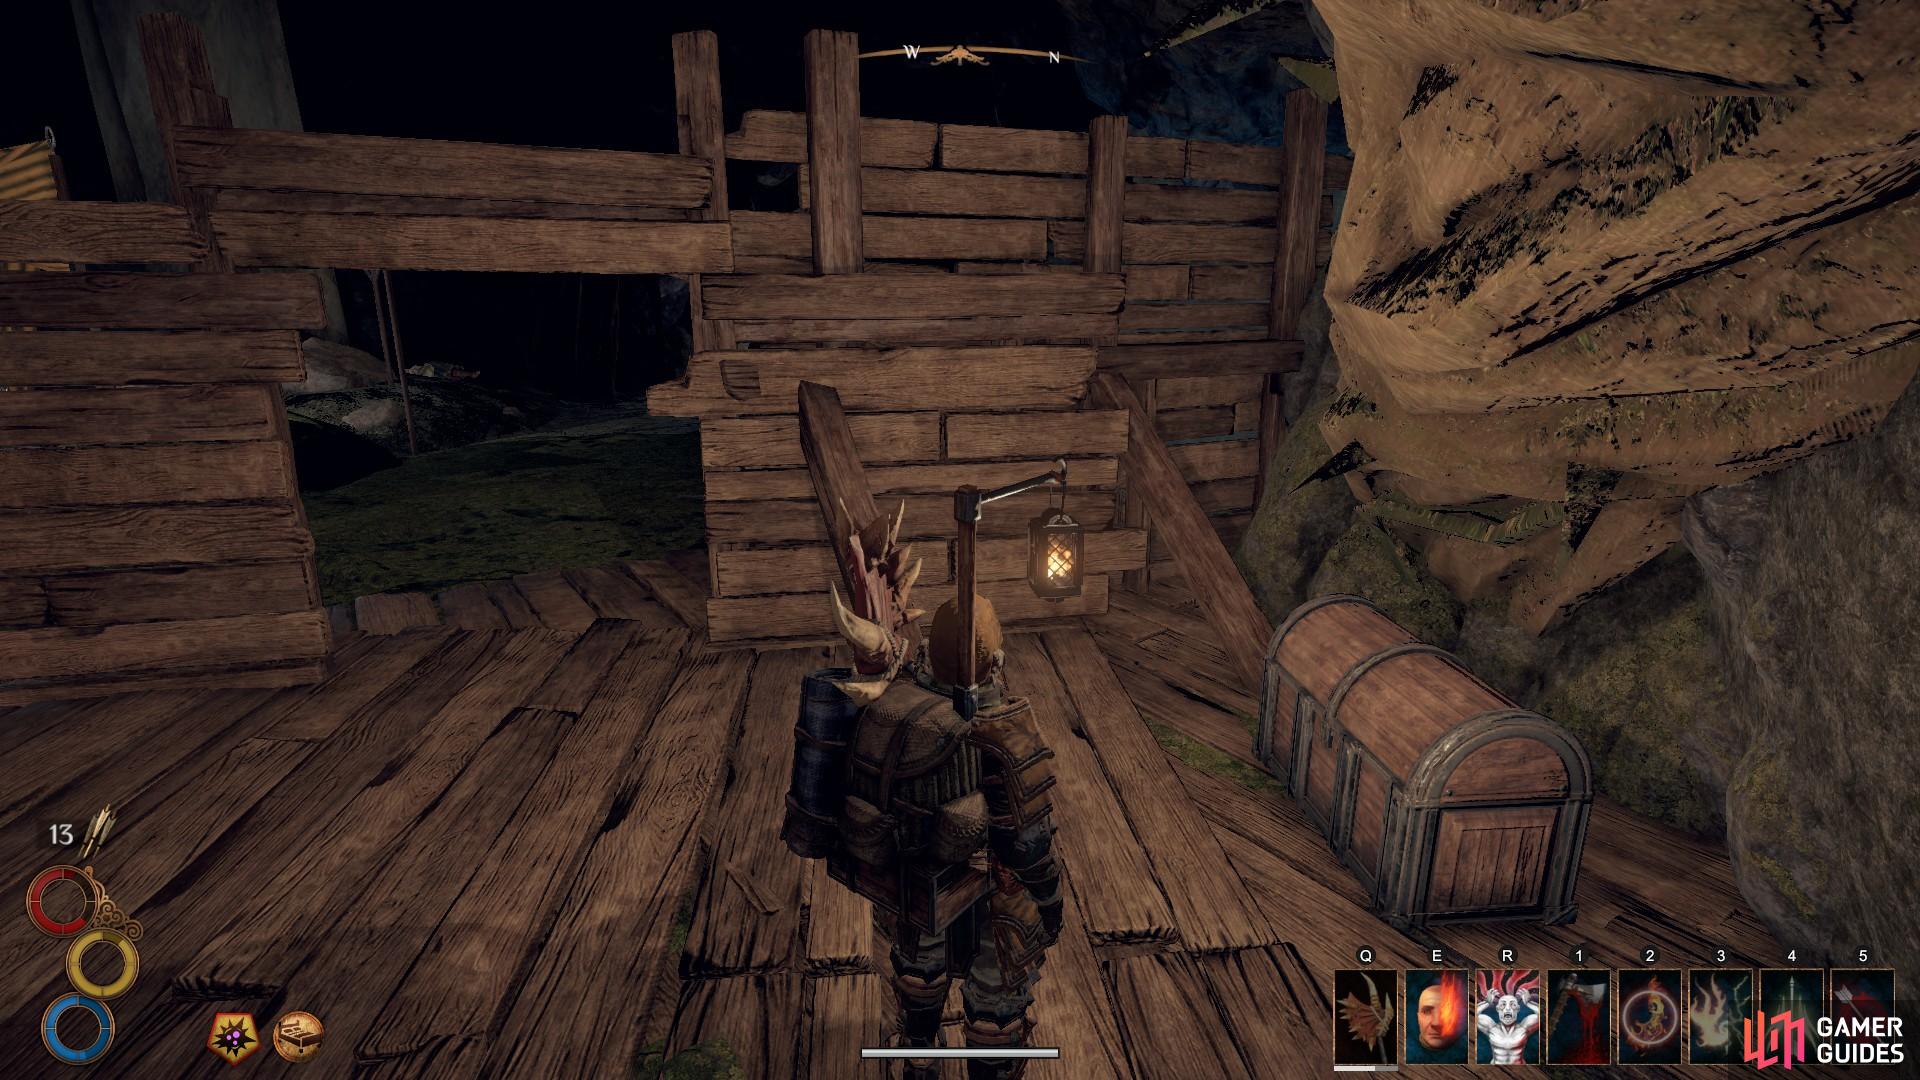 Be sure to loot the chest to your right on the wooden bridge.